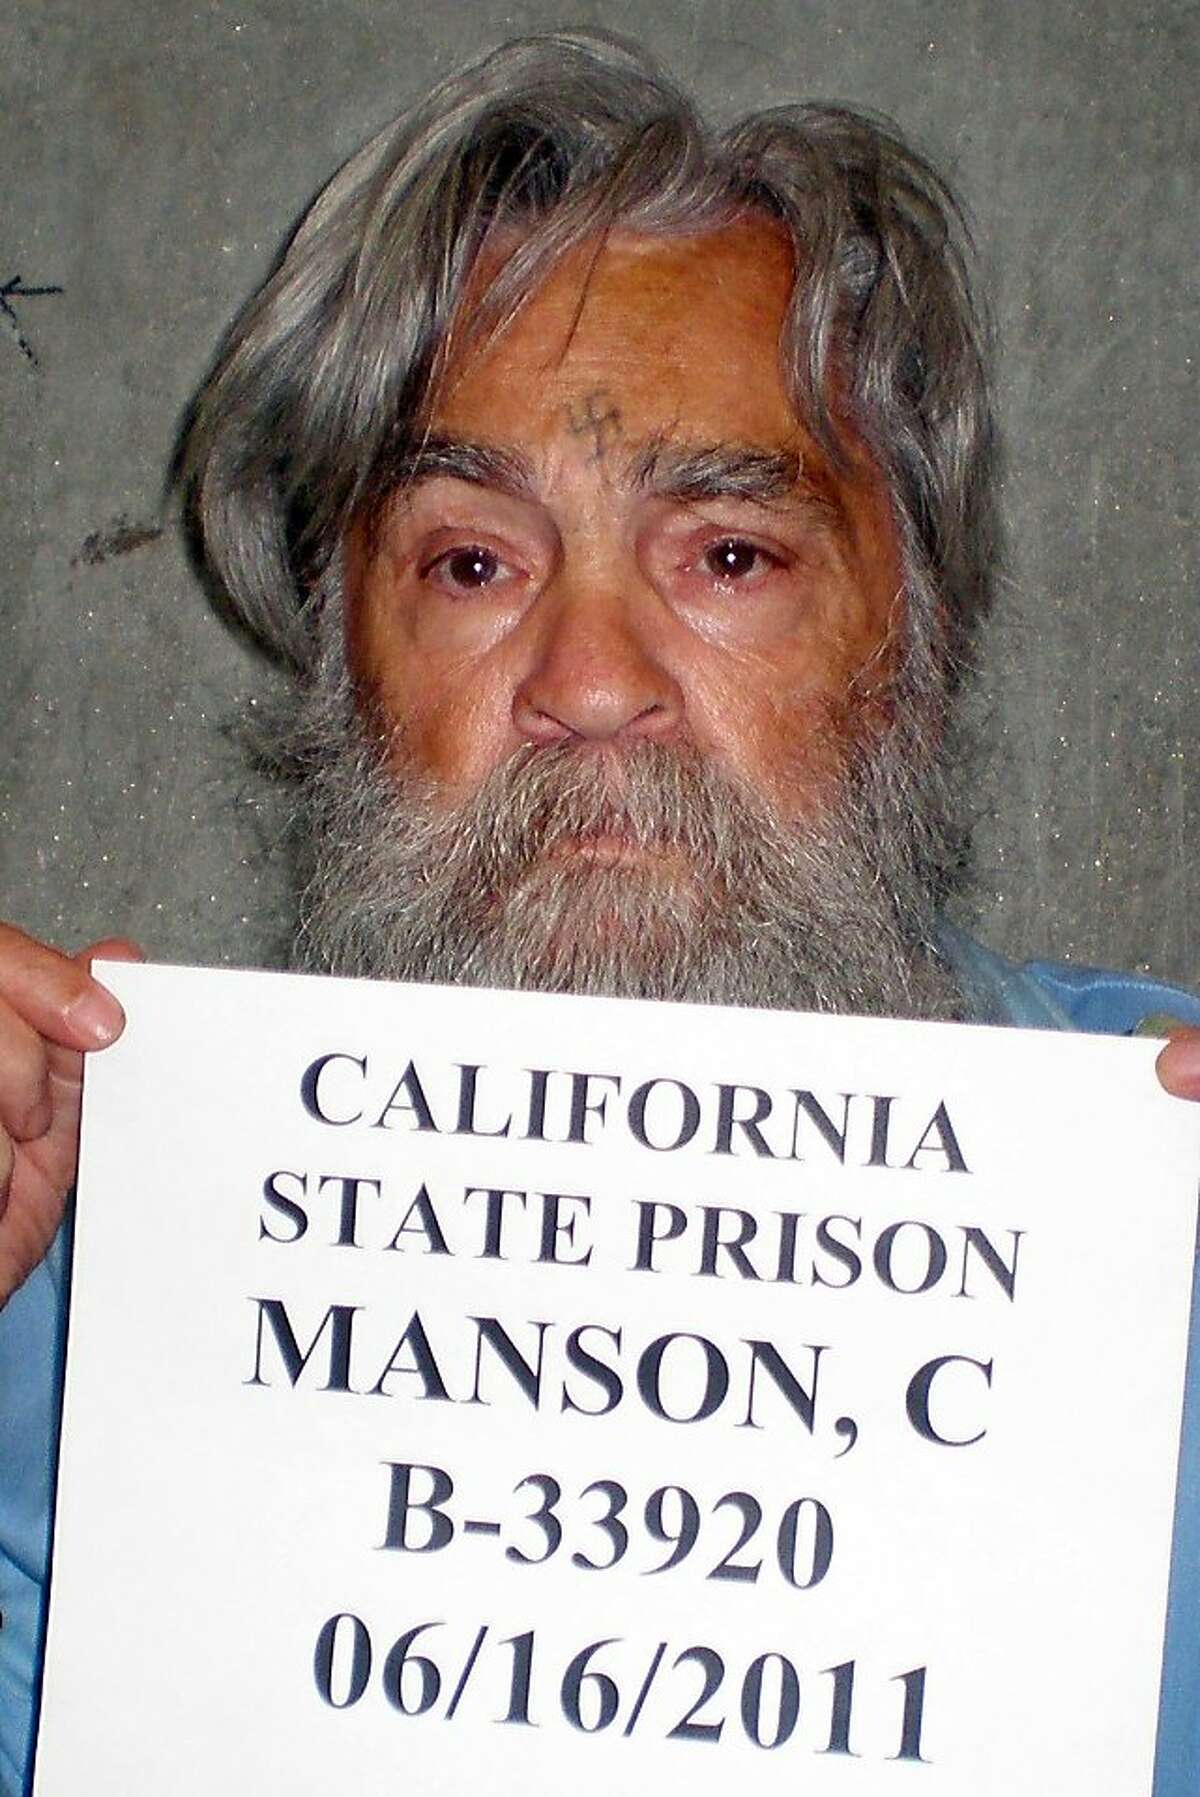 In this photo taken June 16, 2011 and provided by the California Department of Corrections, Charles Manson is seen in Corcoran, Calif. Manson is scheduled to have a parole hearing at Corcoran State Prison on Wednesday, April 11, 2012. (AP Photo/California Department of Corrections)